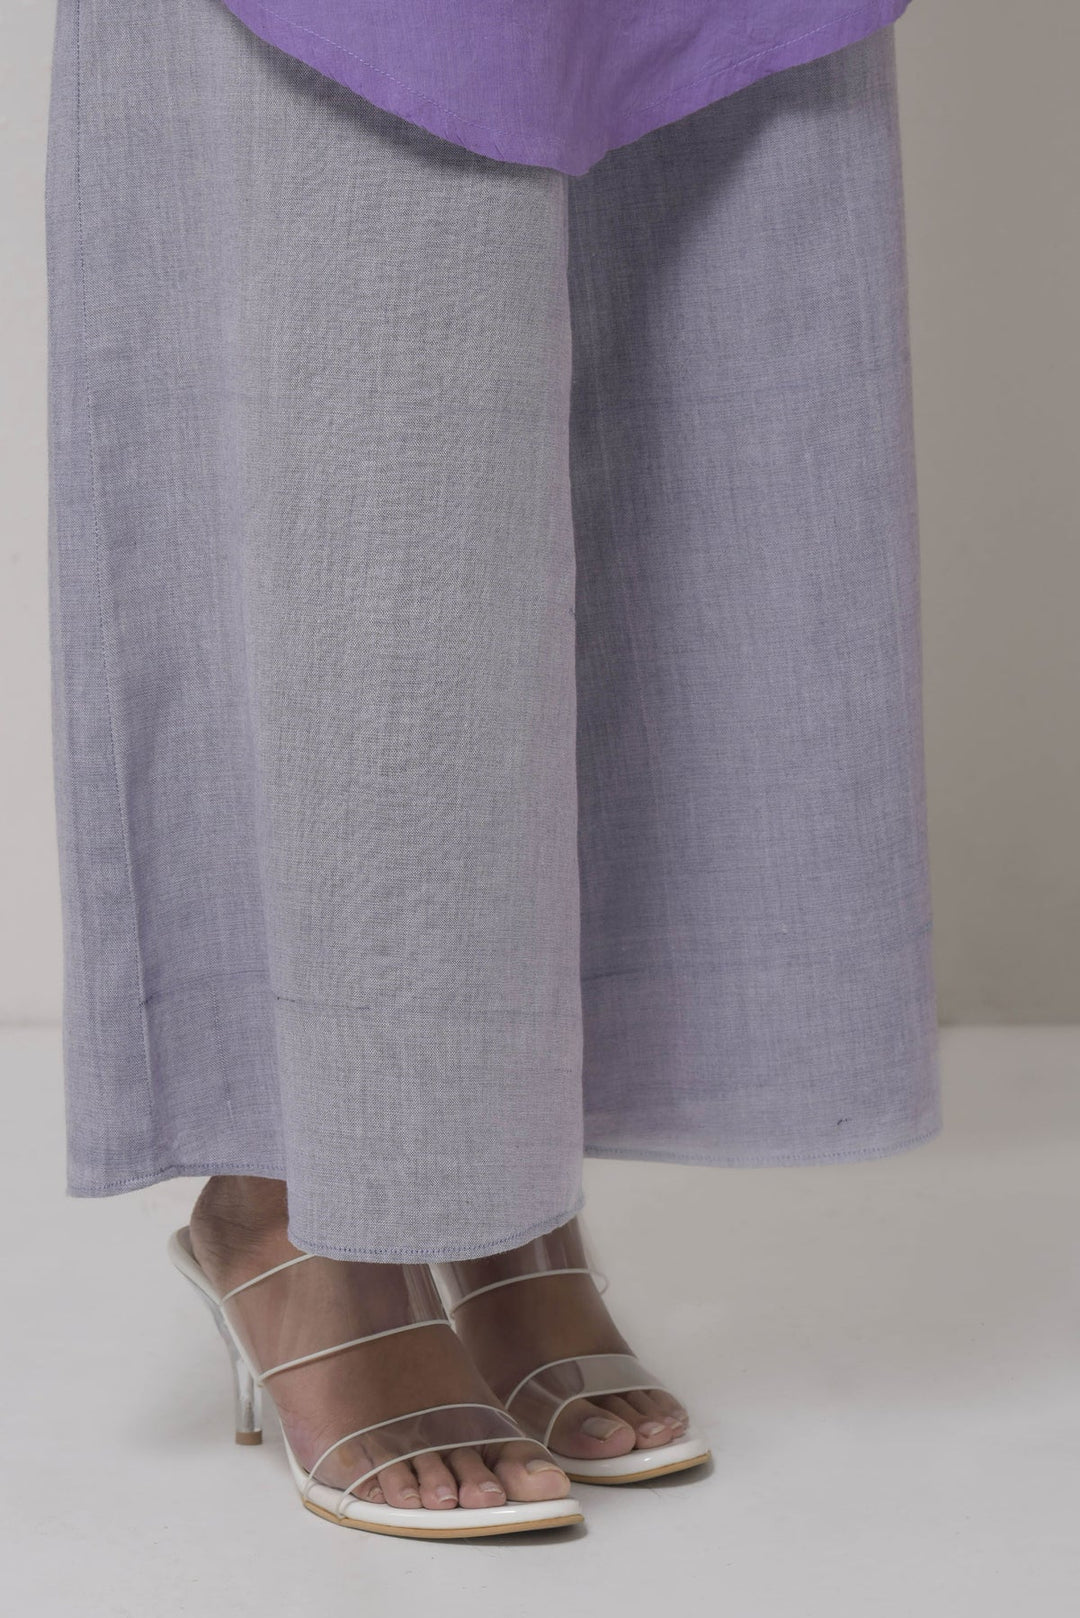 Vintage Periwinkle Cotton Trousers with Belt | Akira Handwoven Trousers - Light Purple